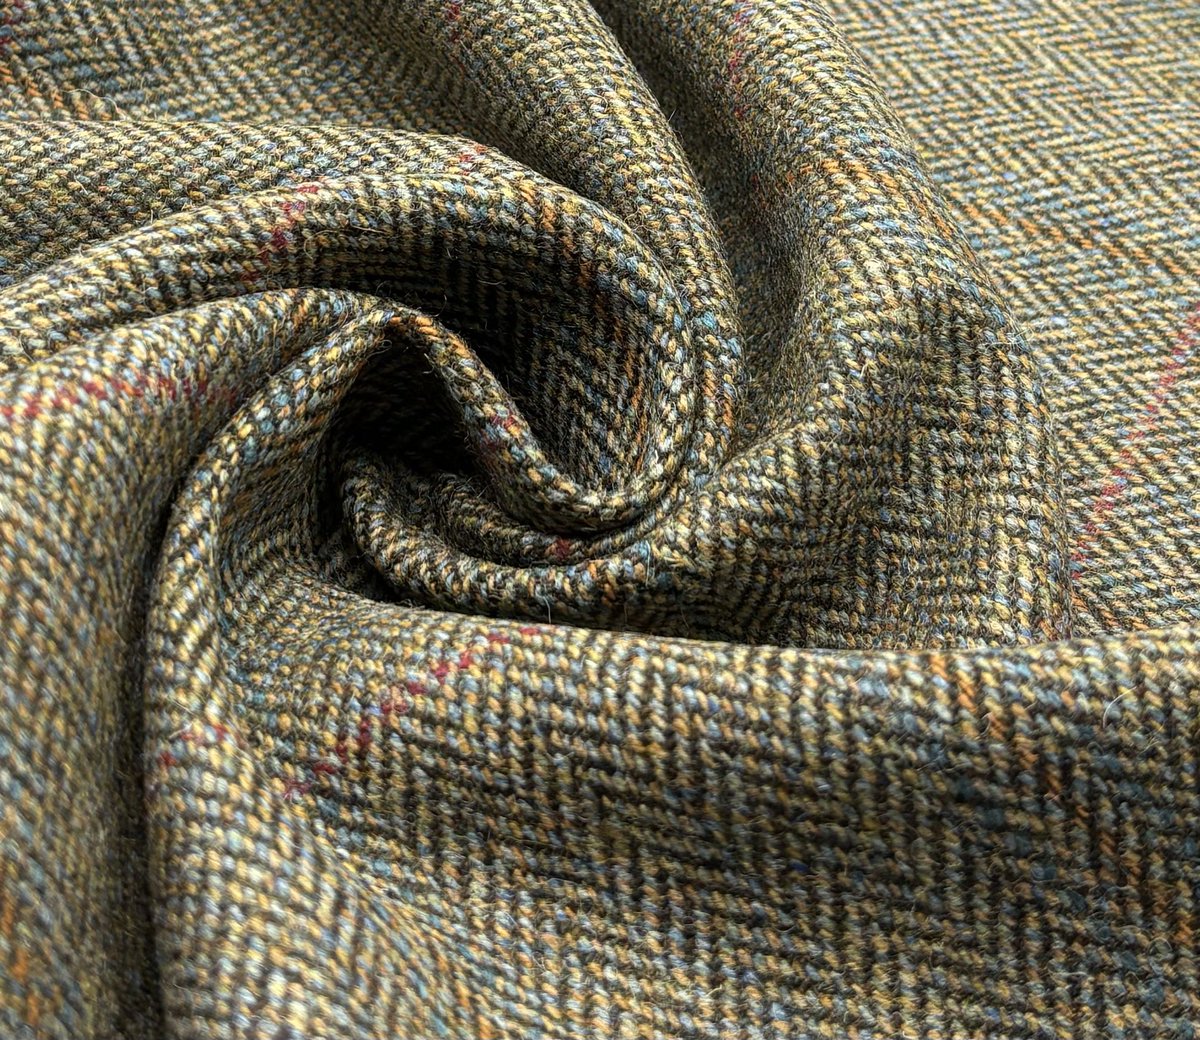 New arrival 😁😁 beautiful green / blue herringbone with a yellow check design. Made from luxury tweed wool fabric. Online at kabbanitextiles.com #madeinengland #tweed #wool #upholstery #hunting #countryside #herringbone #jacketing